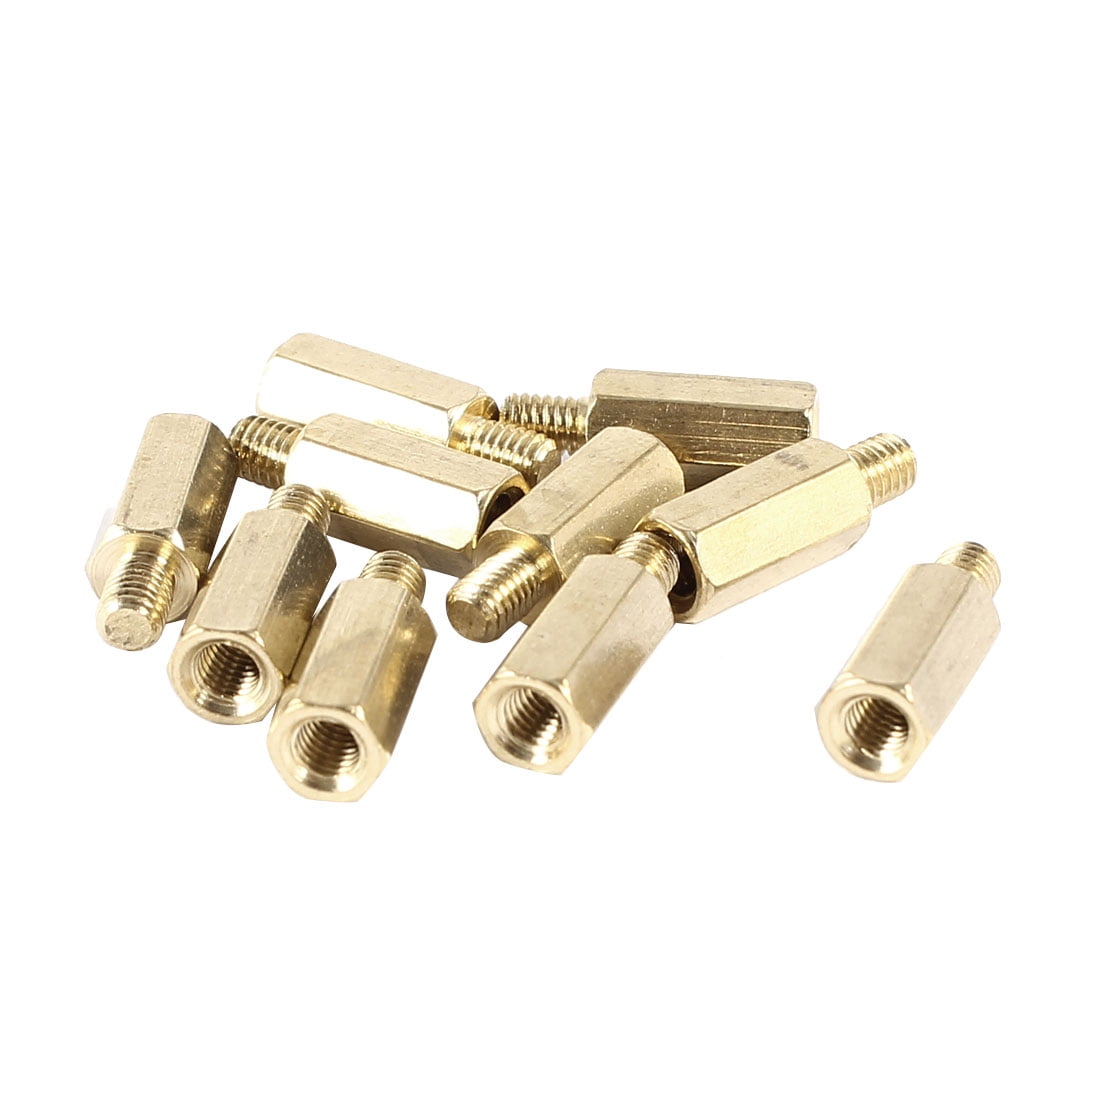 M3 Female Thread Brass Standoff Spacer 10mm Length 30 Pieces 